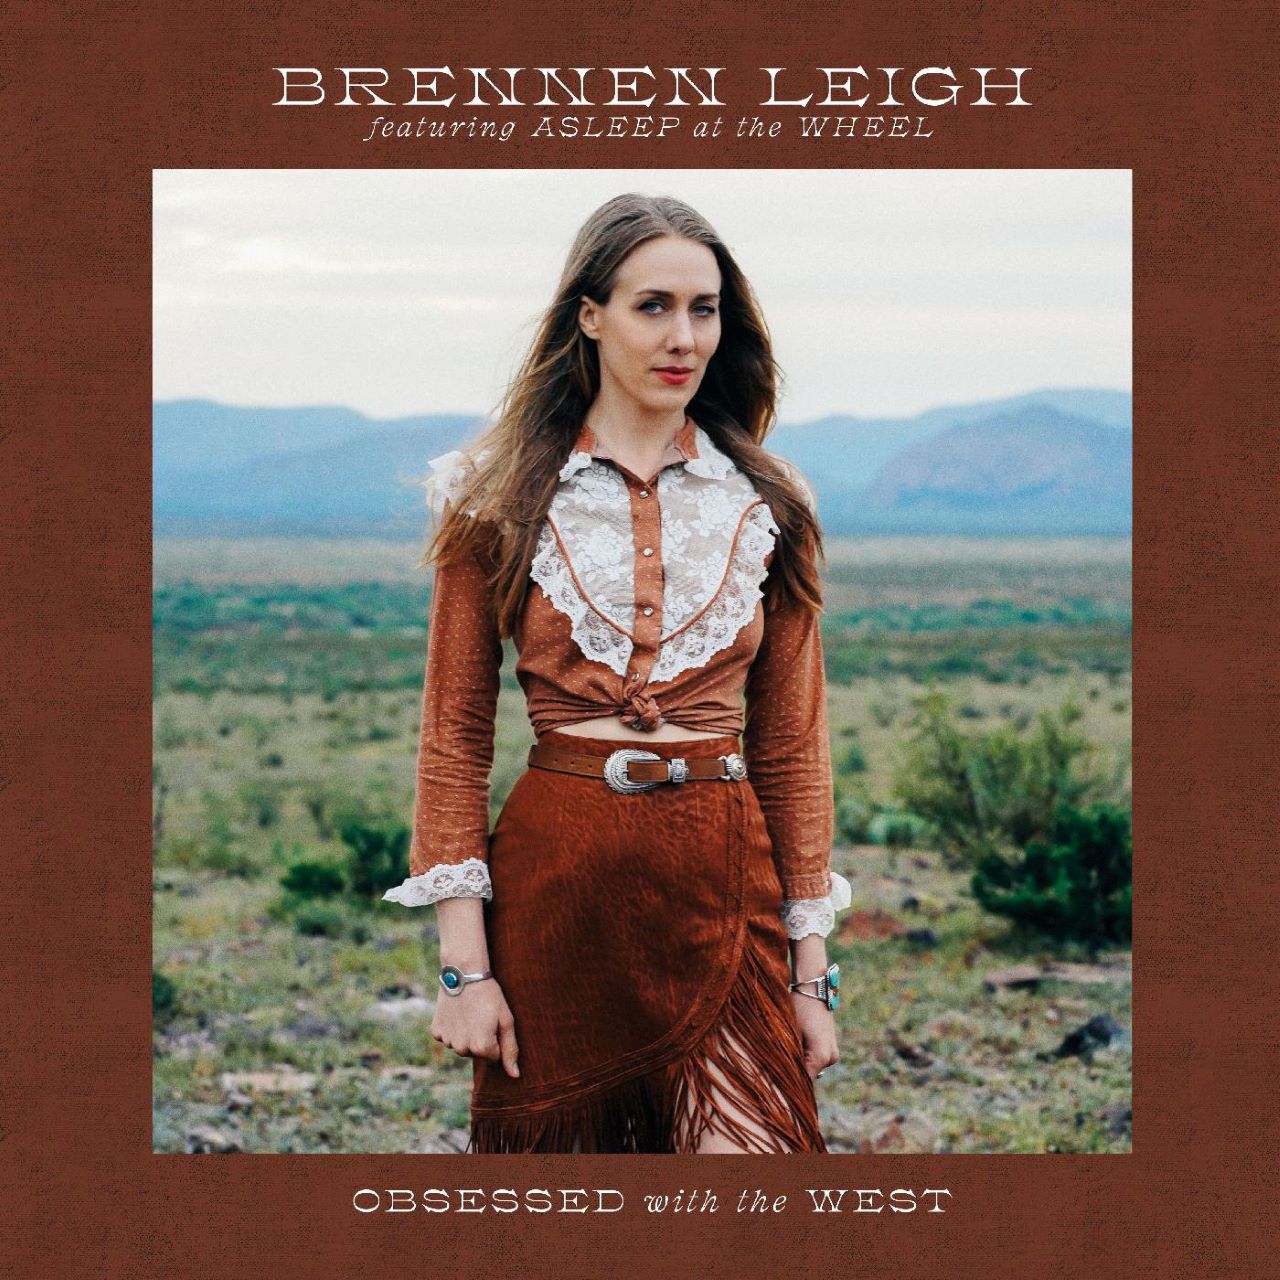 Brennen Leigh - Obsessed With The West cover album